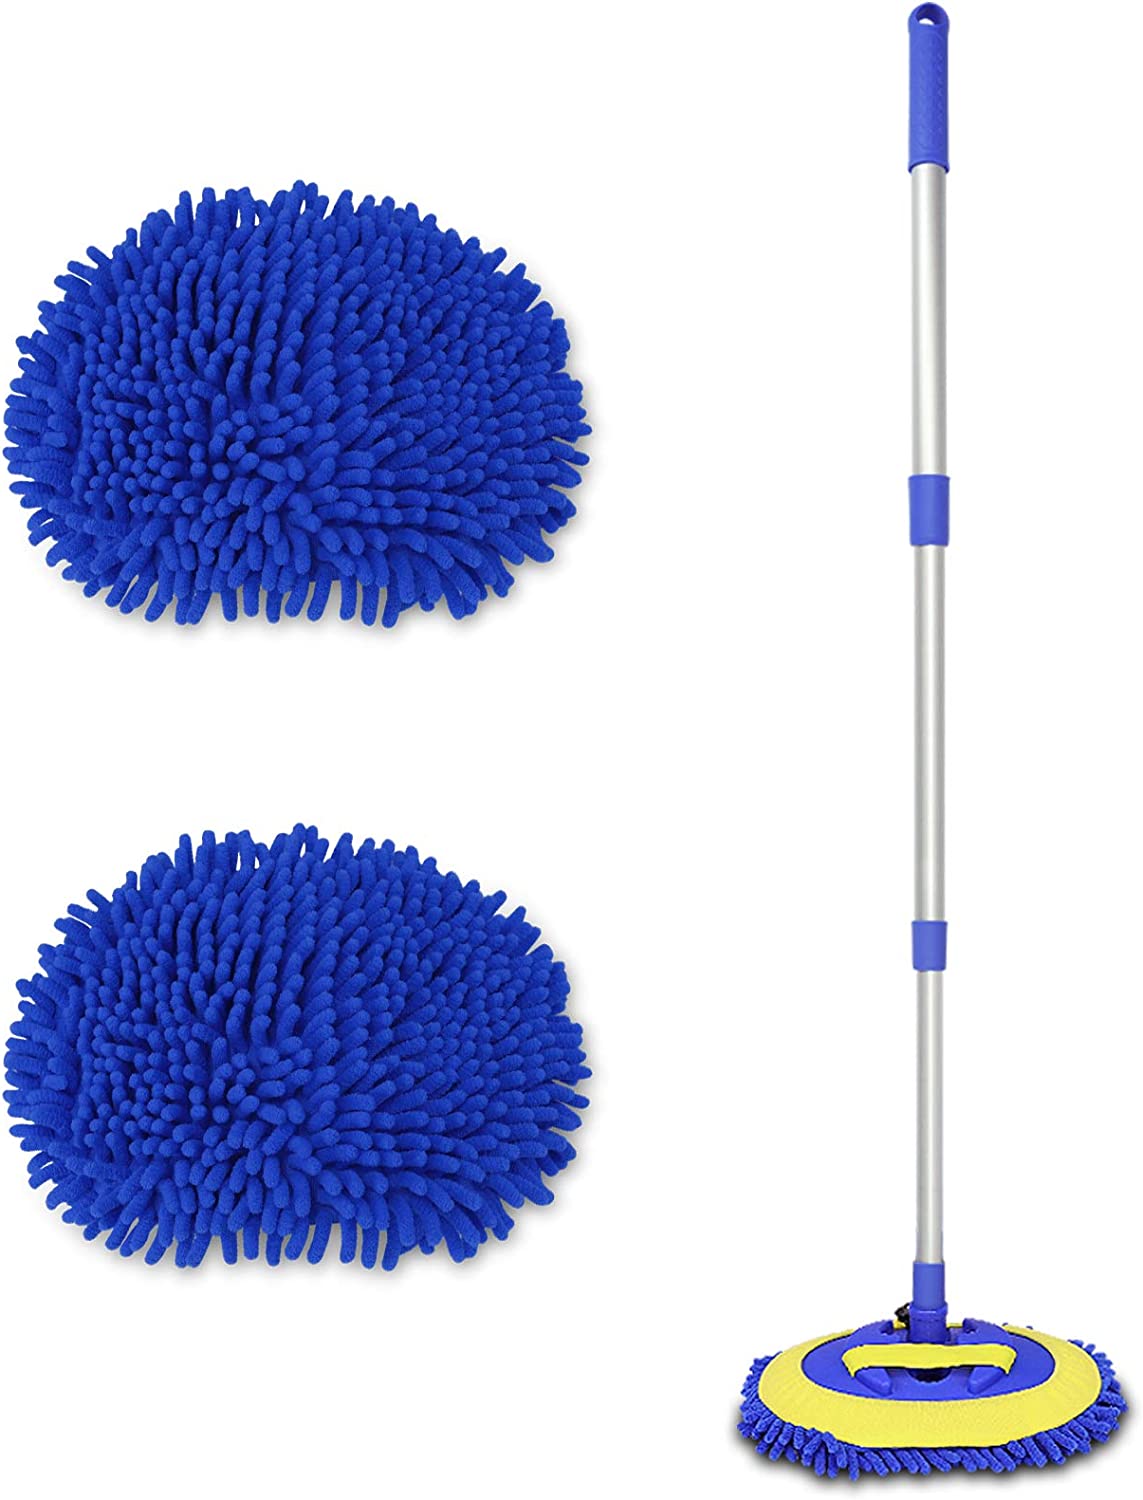 2 in 1 Chenille Microfiber Car Wash Brush Mop Mitt with 45" Aluminum Alloy Long Handle, Car Cleaning Kit Brush Duster, Not Hurt Paint Scratch Free Cleaning Tool Dust Collector Supply for Washing Truck